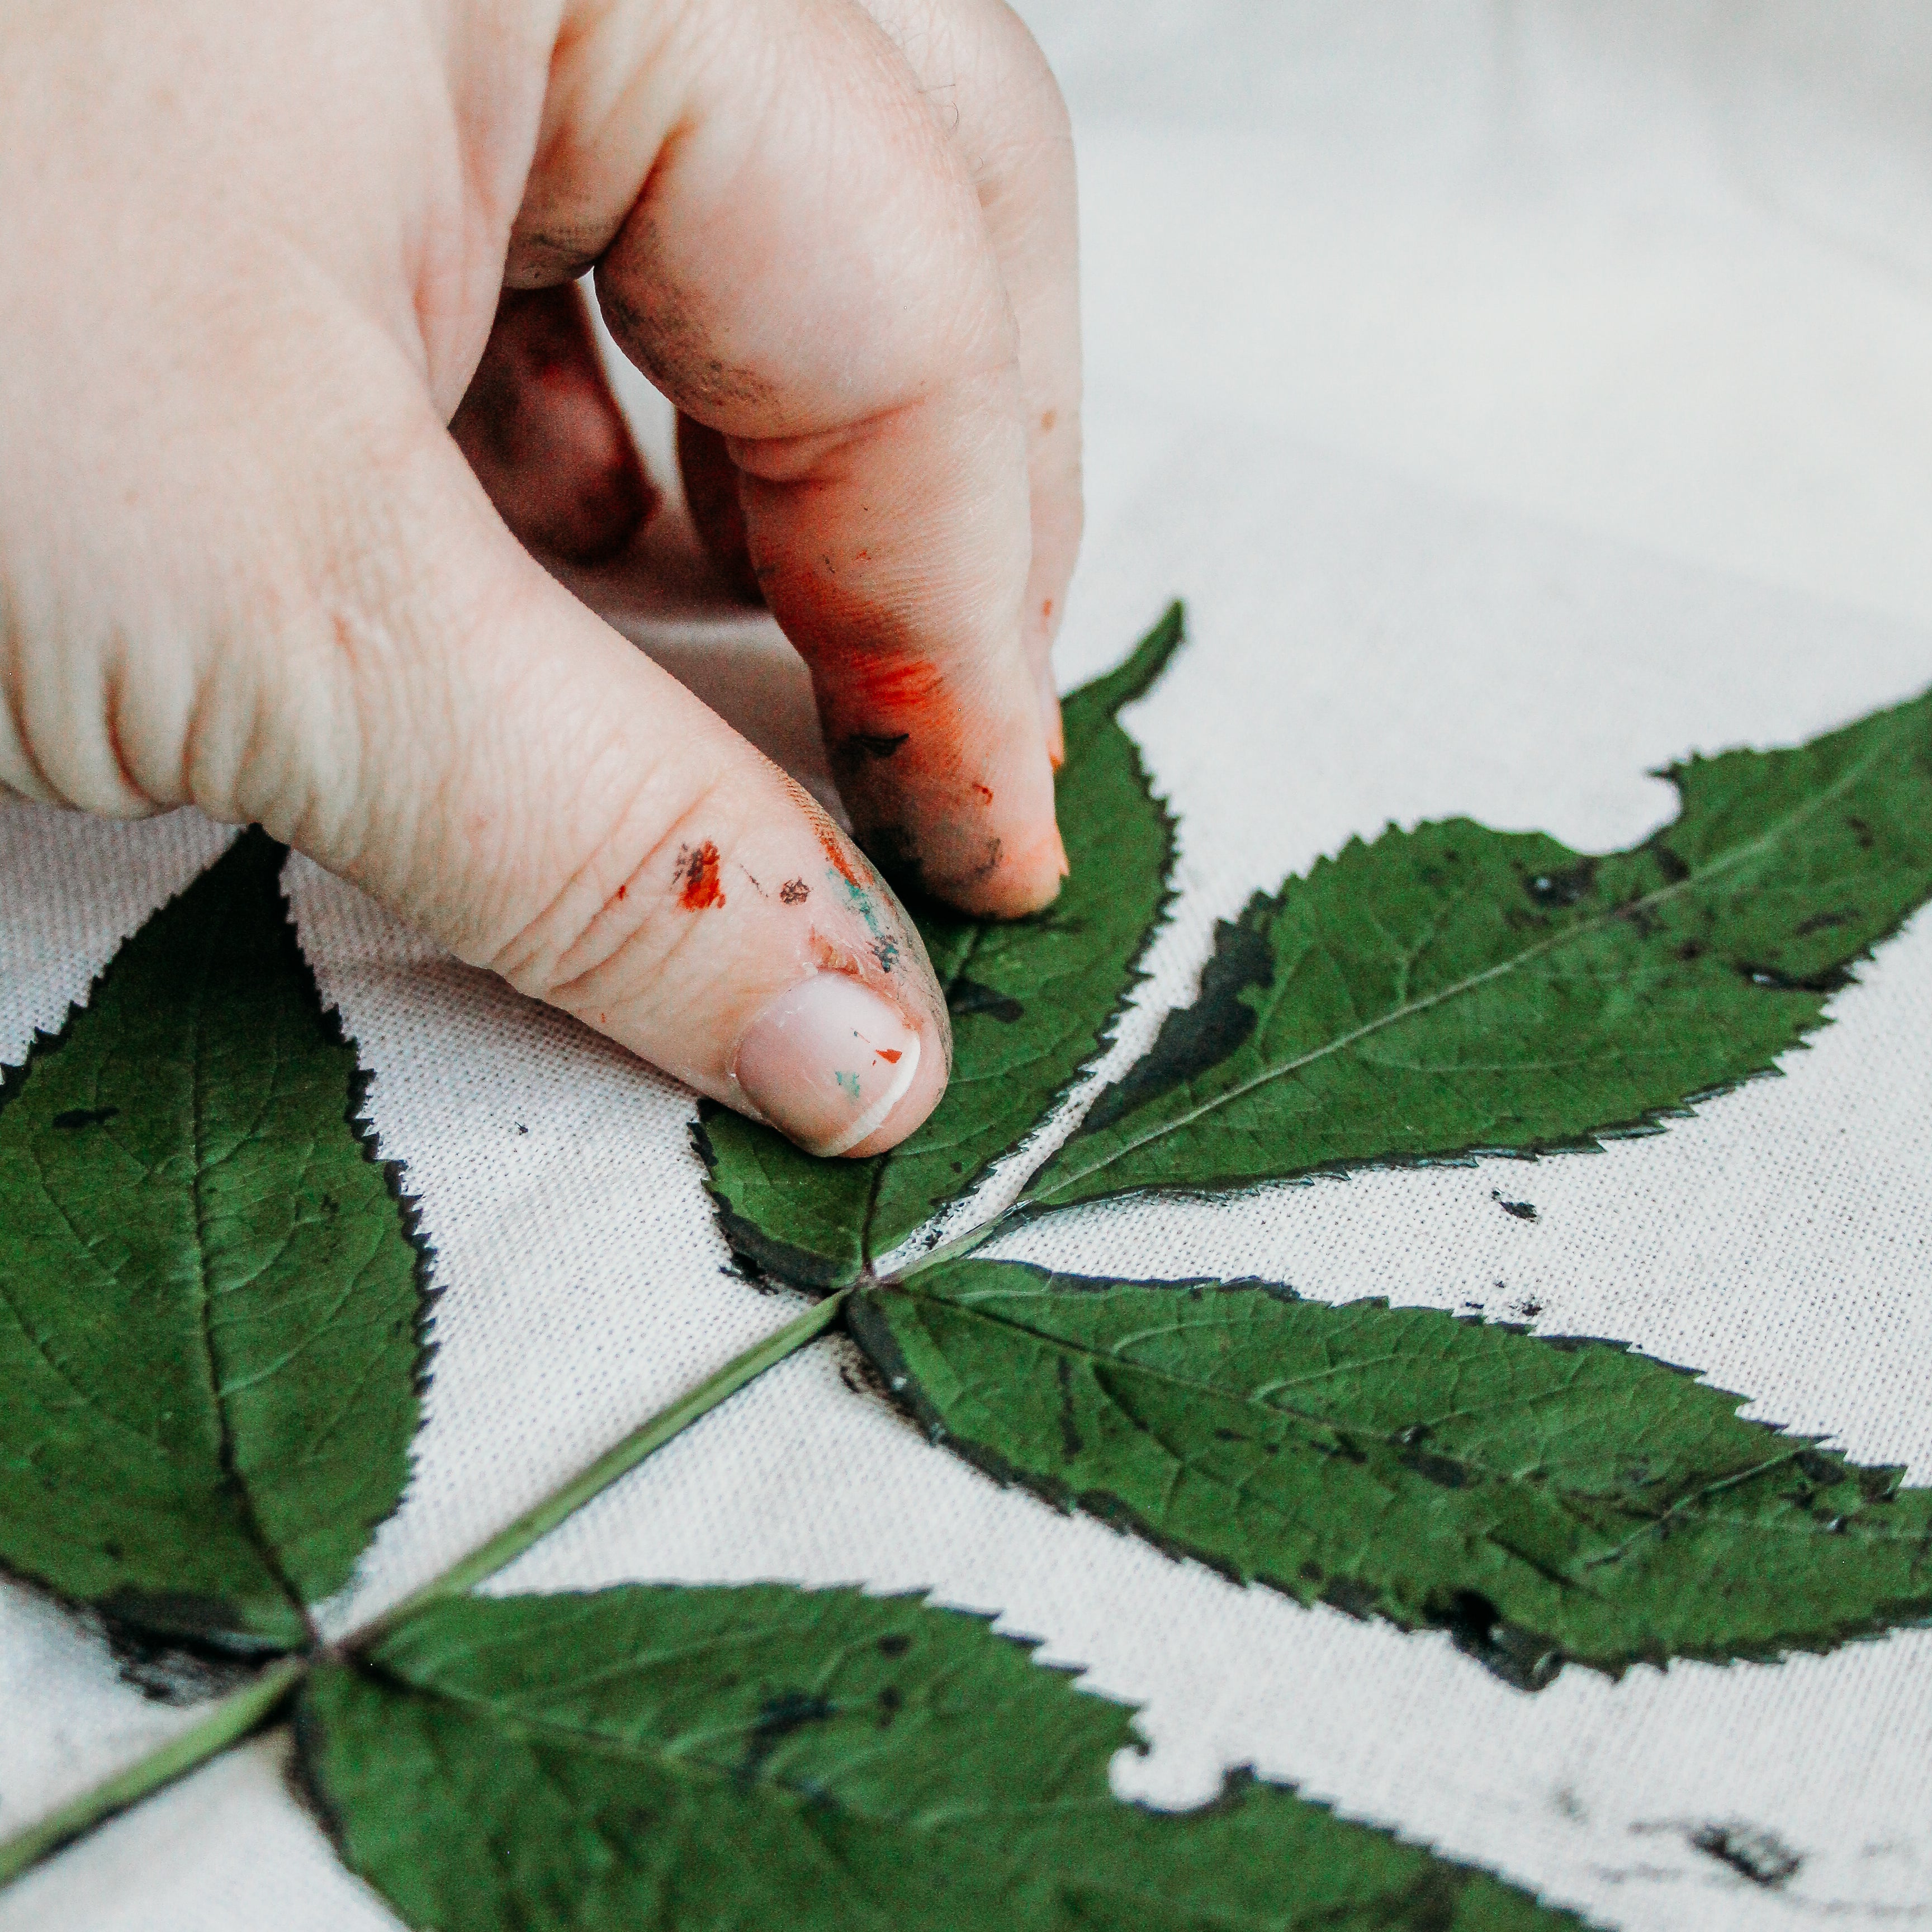 A hand presses firmly down on a leaf on a canvas bag.